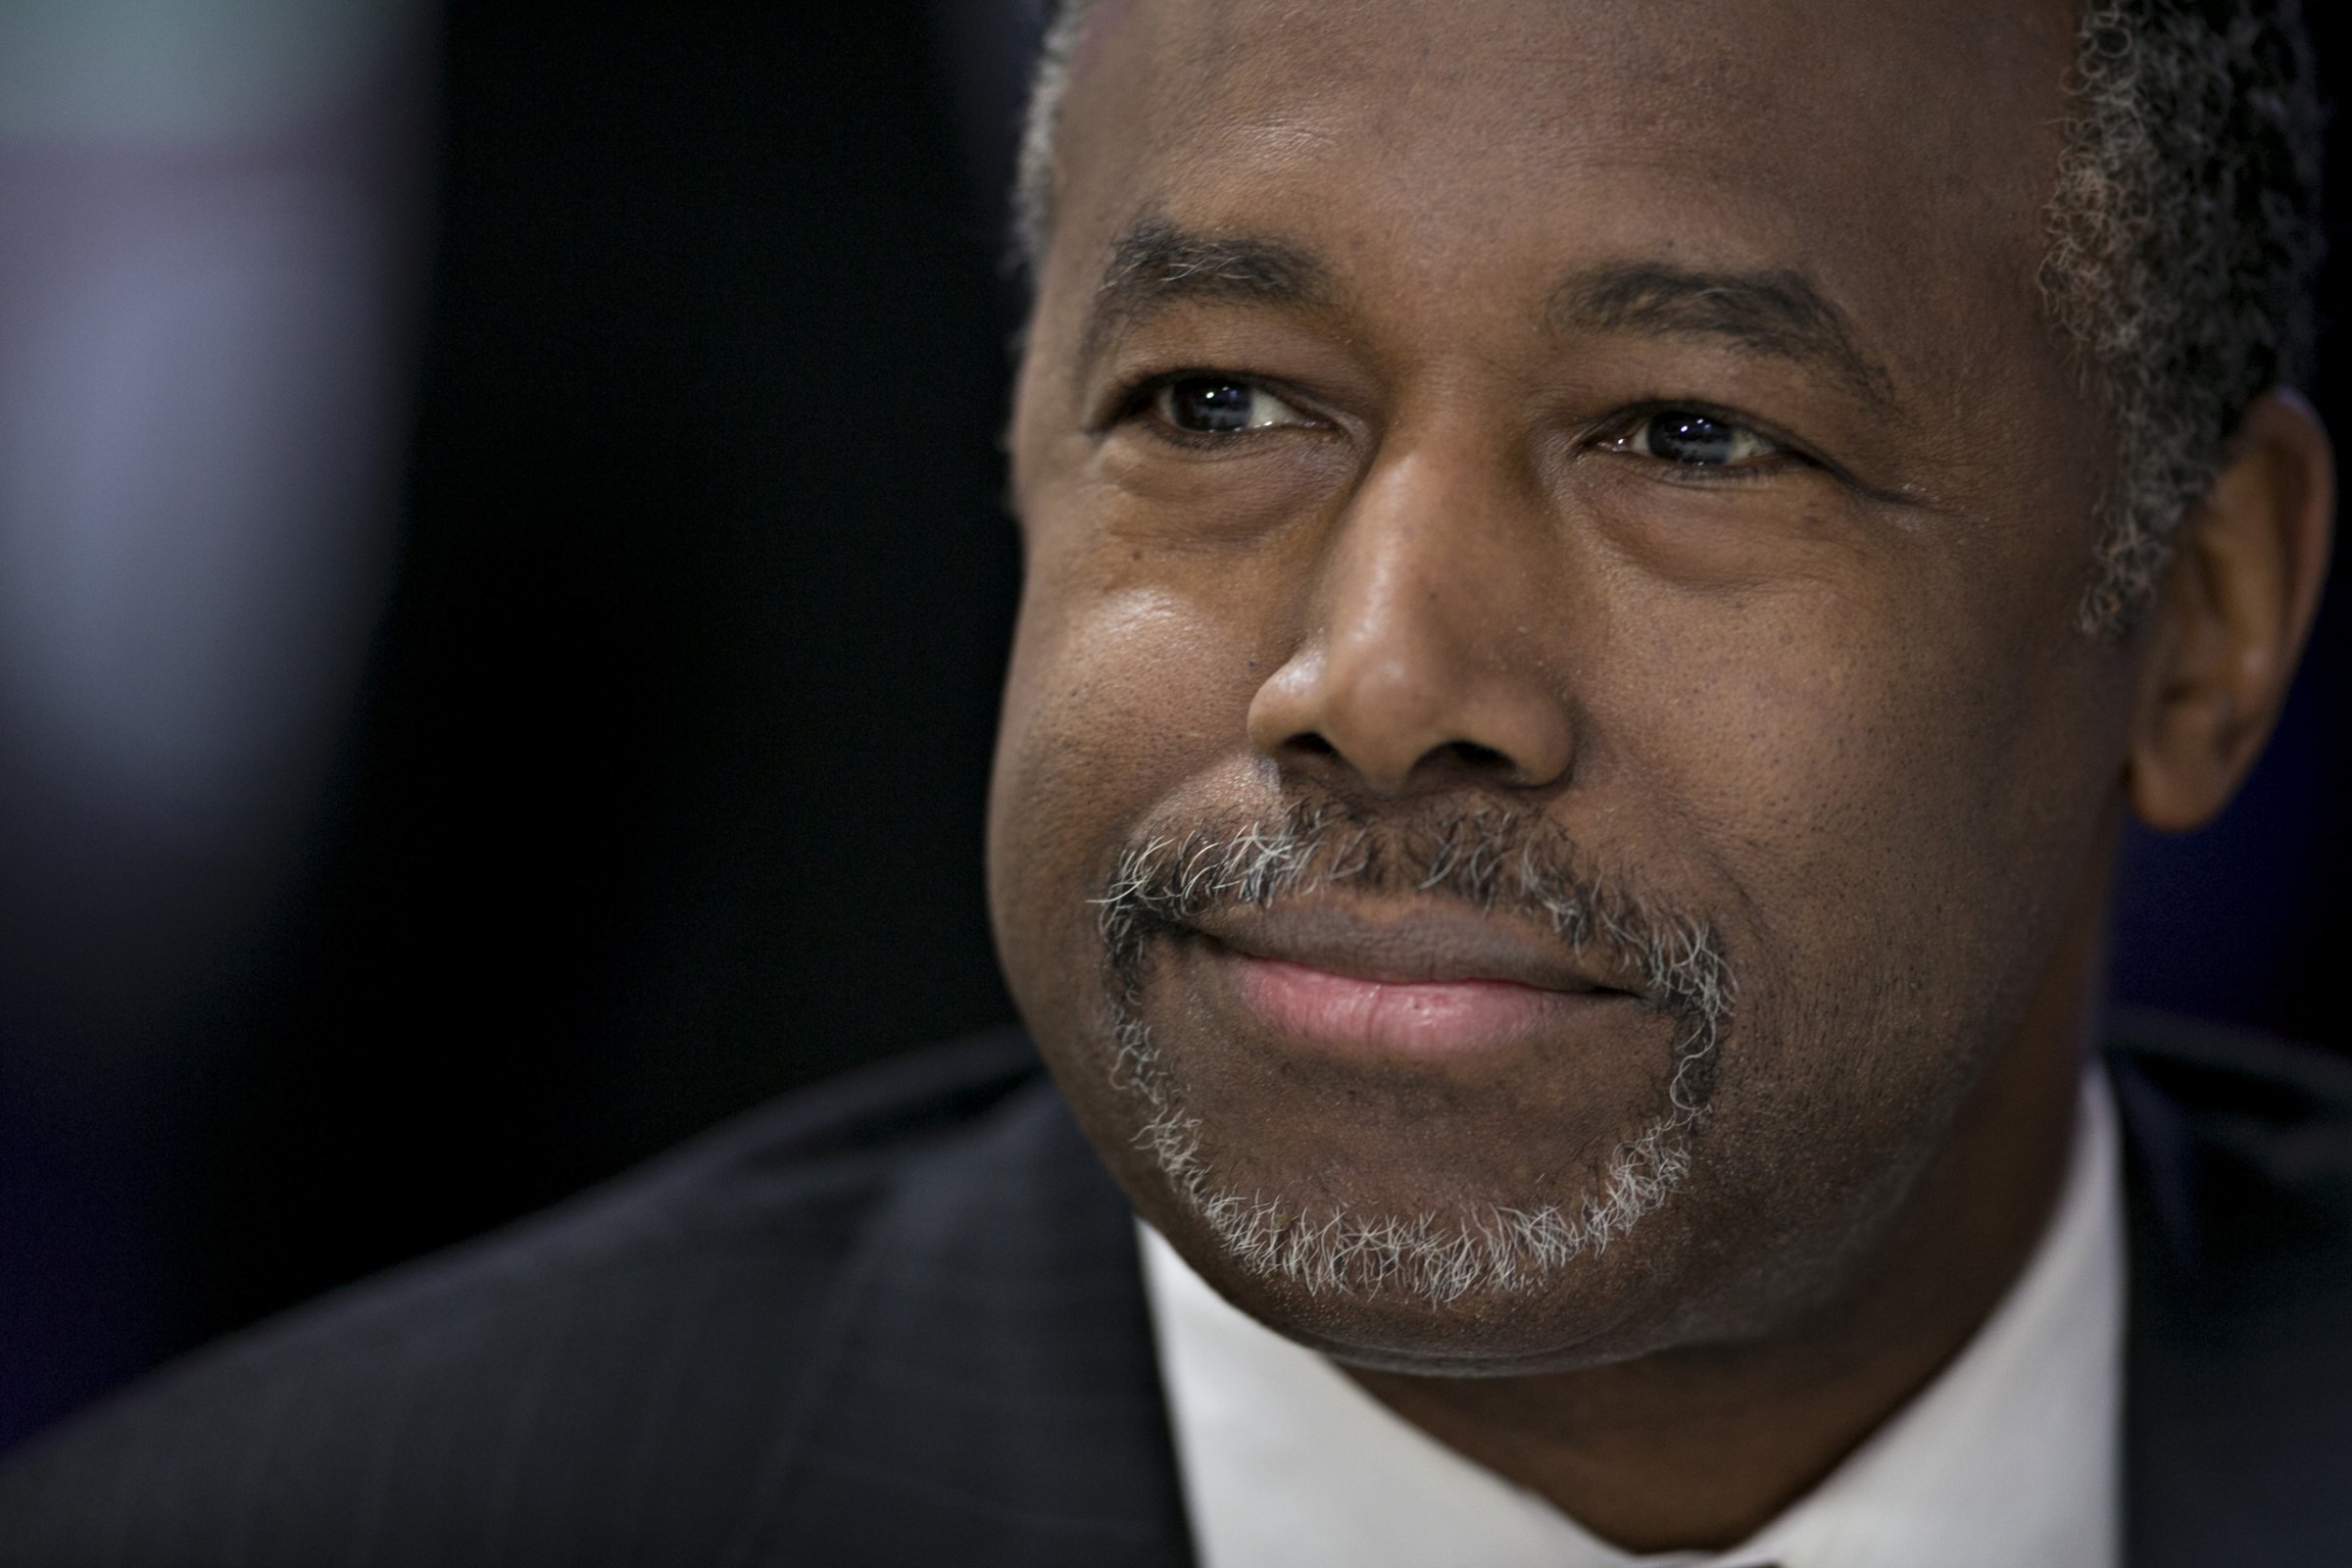 Ben Carson, retired neurosurgeon and 2016 Republican presidential candidate, listens to a question during a Bloomberg Politics interview in Des Moines, Iowa, U.S., on Wednesday, Jan. 27, 2016. Carson has made his Christian faith and the kind of issues that motivate faith-based voters a central part of his pitches to Iowa's heavily evangelical Republican caucus-goers but in the state that will kick off voting for a presidential nomination with its Feb. 1 caucuses, hes being bested by Donald Trump. Photographer: Andrew Harrer/Bloomberg via Getty Images